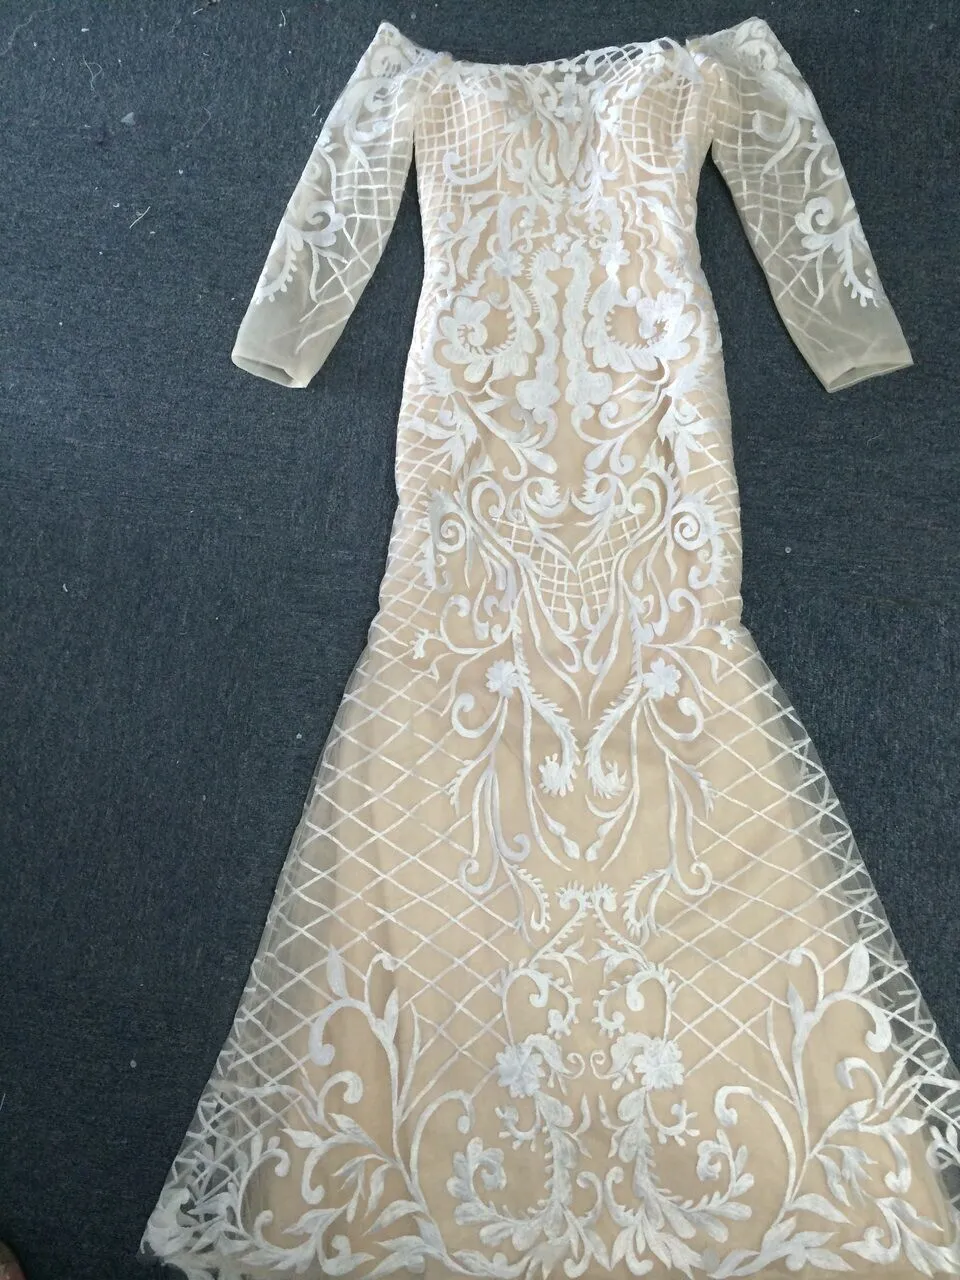 2015 Embroidery Evening Dresses Mermaid Ivory over Champagne Off Shoulder Long Sleeves In Nude Color Fashion Real Pictures dhyz 016754426